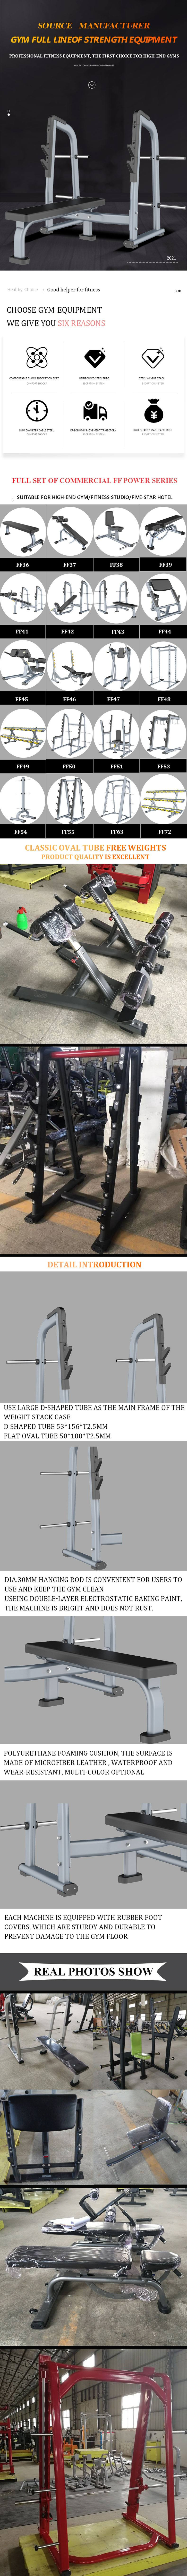 Used Weight Lifting Fitness Equipment Power Rack Squat Rack For Gym